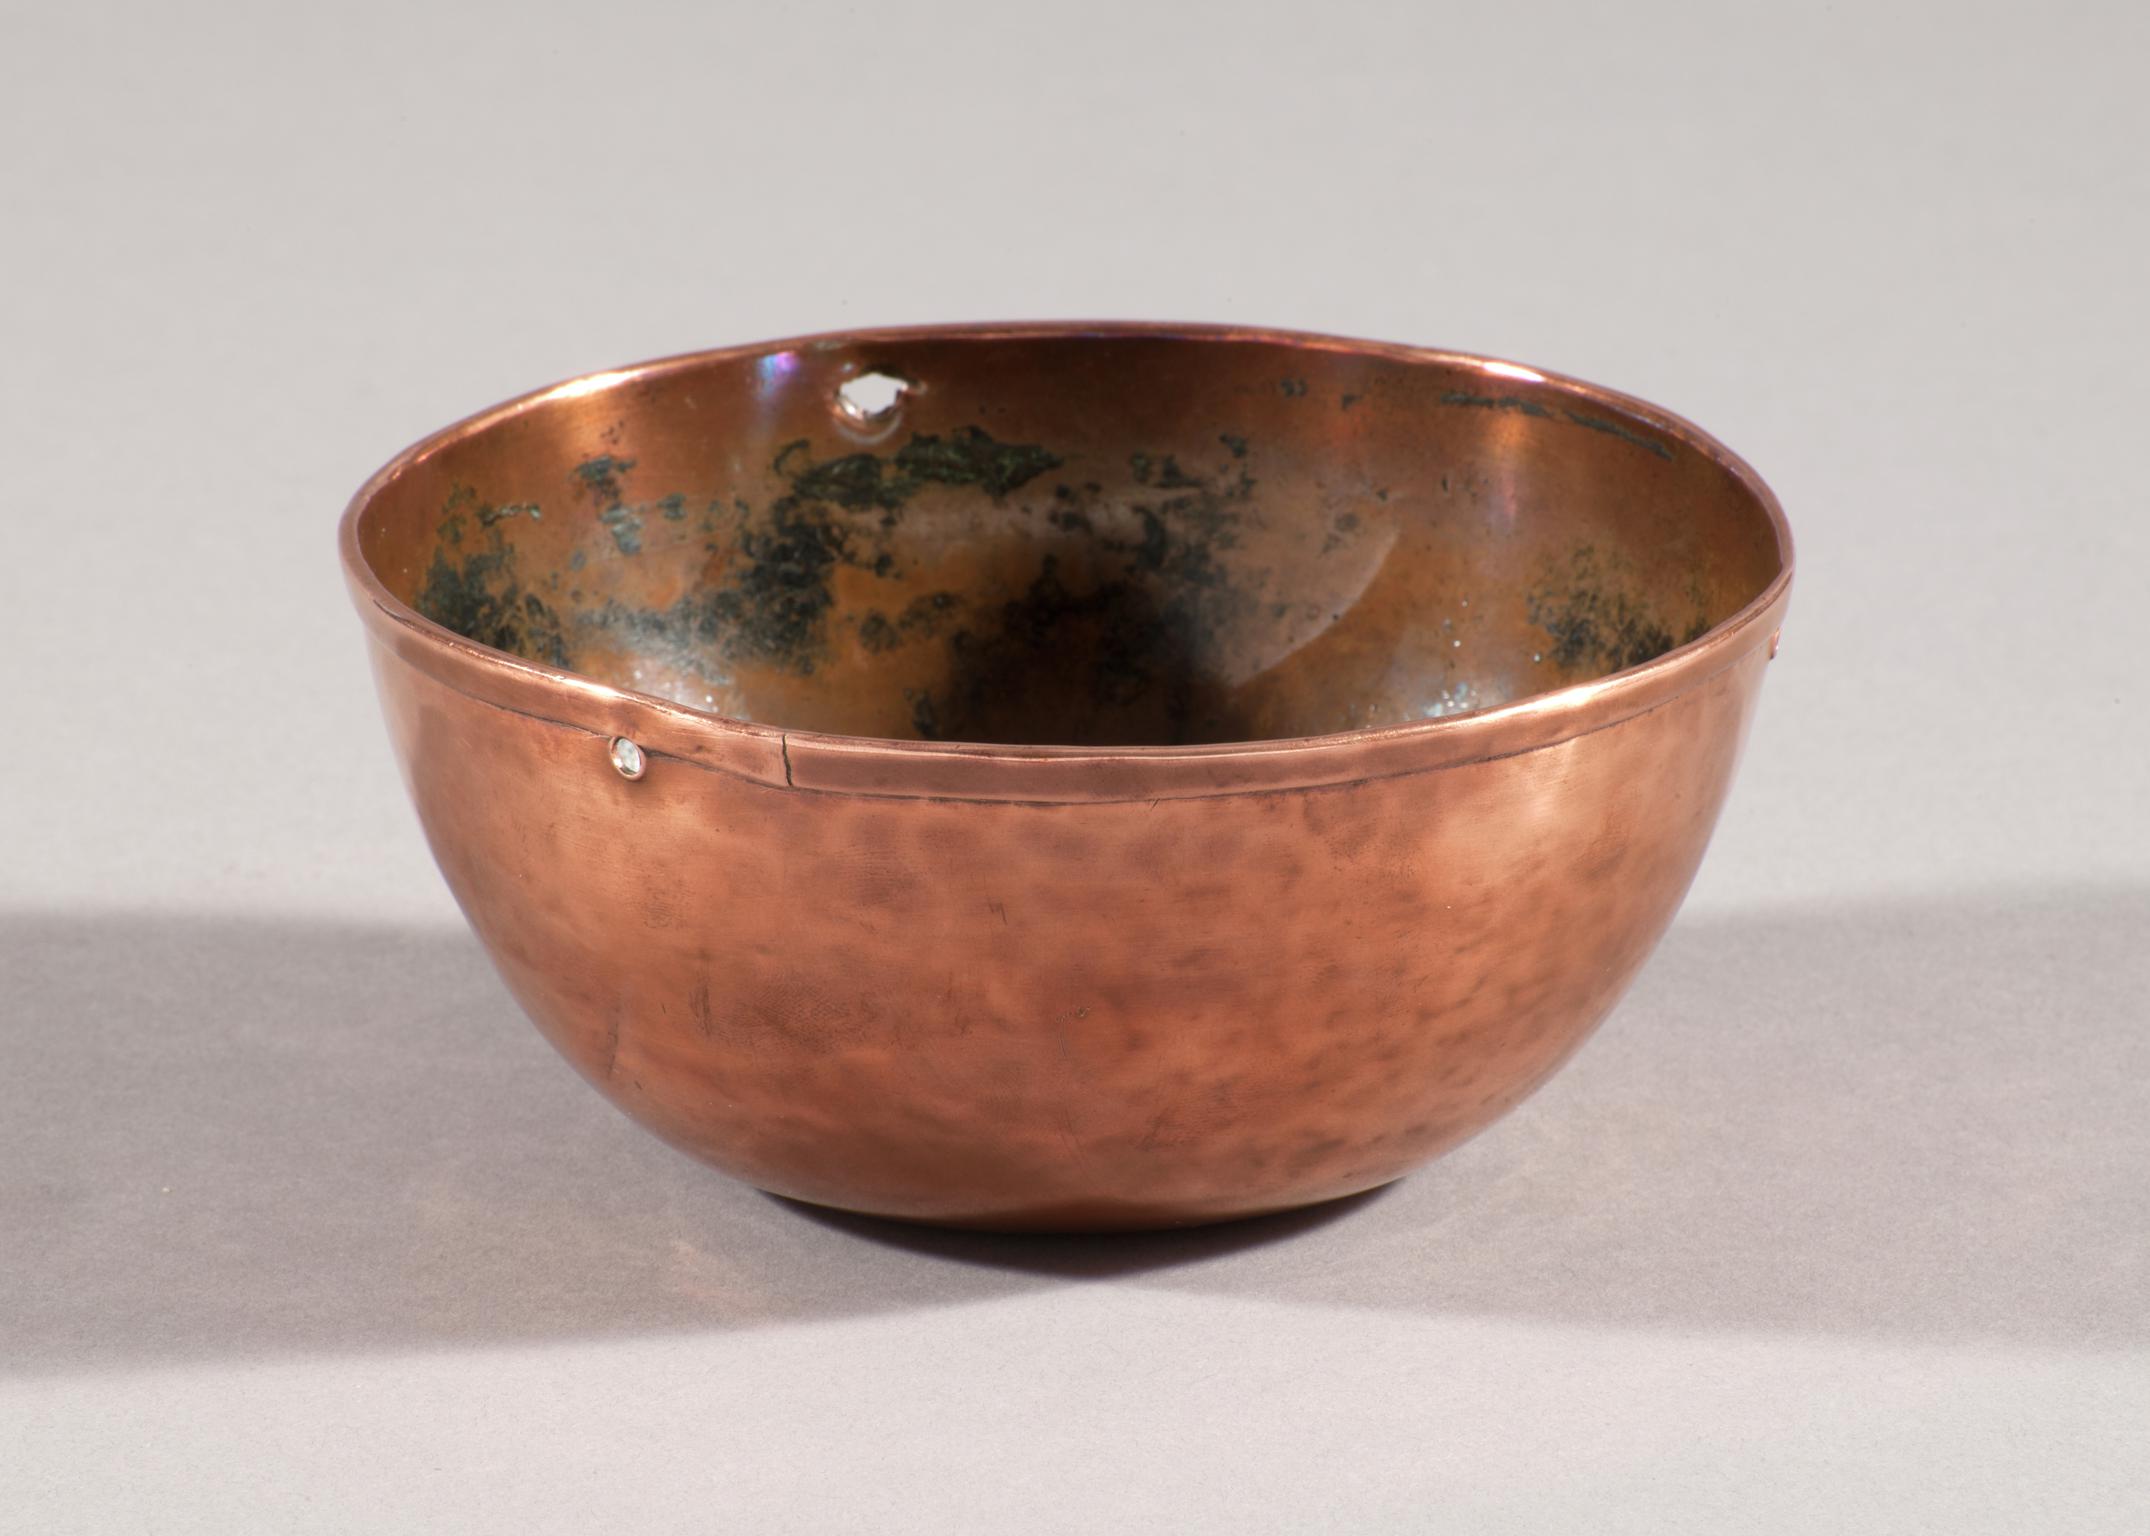 Copper bowl poss made at Upper Bank copper works